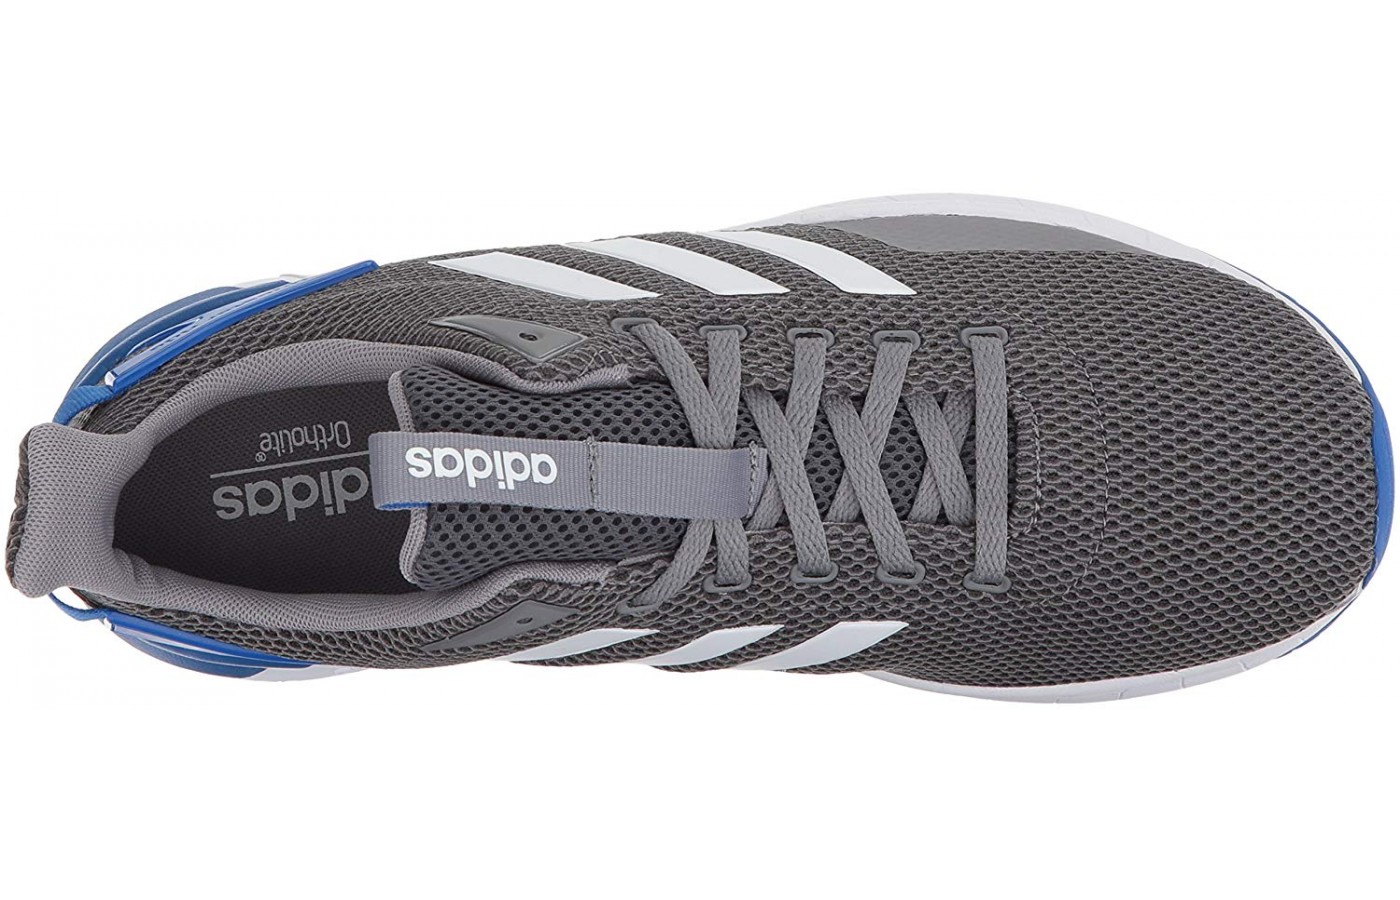 Adidas Questar Ride Reviewed \u0026 Rated in 